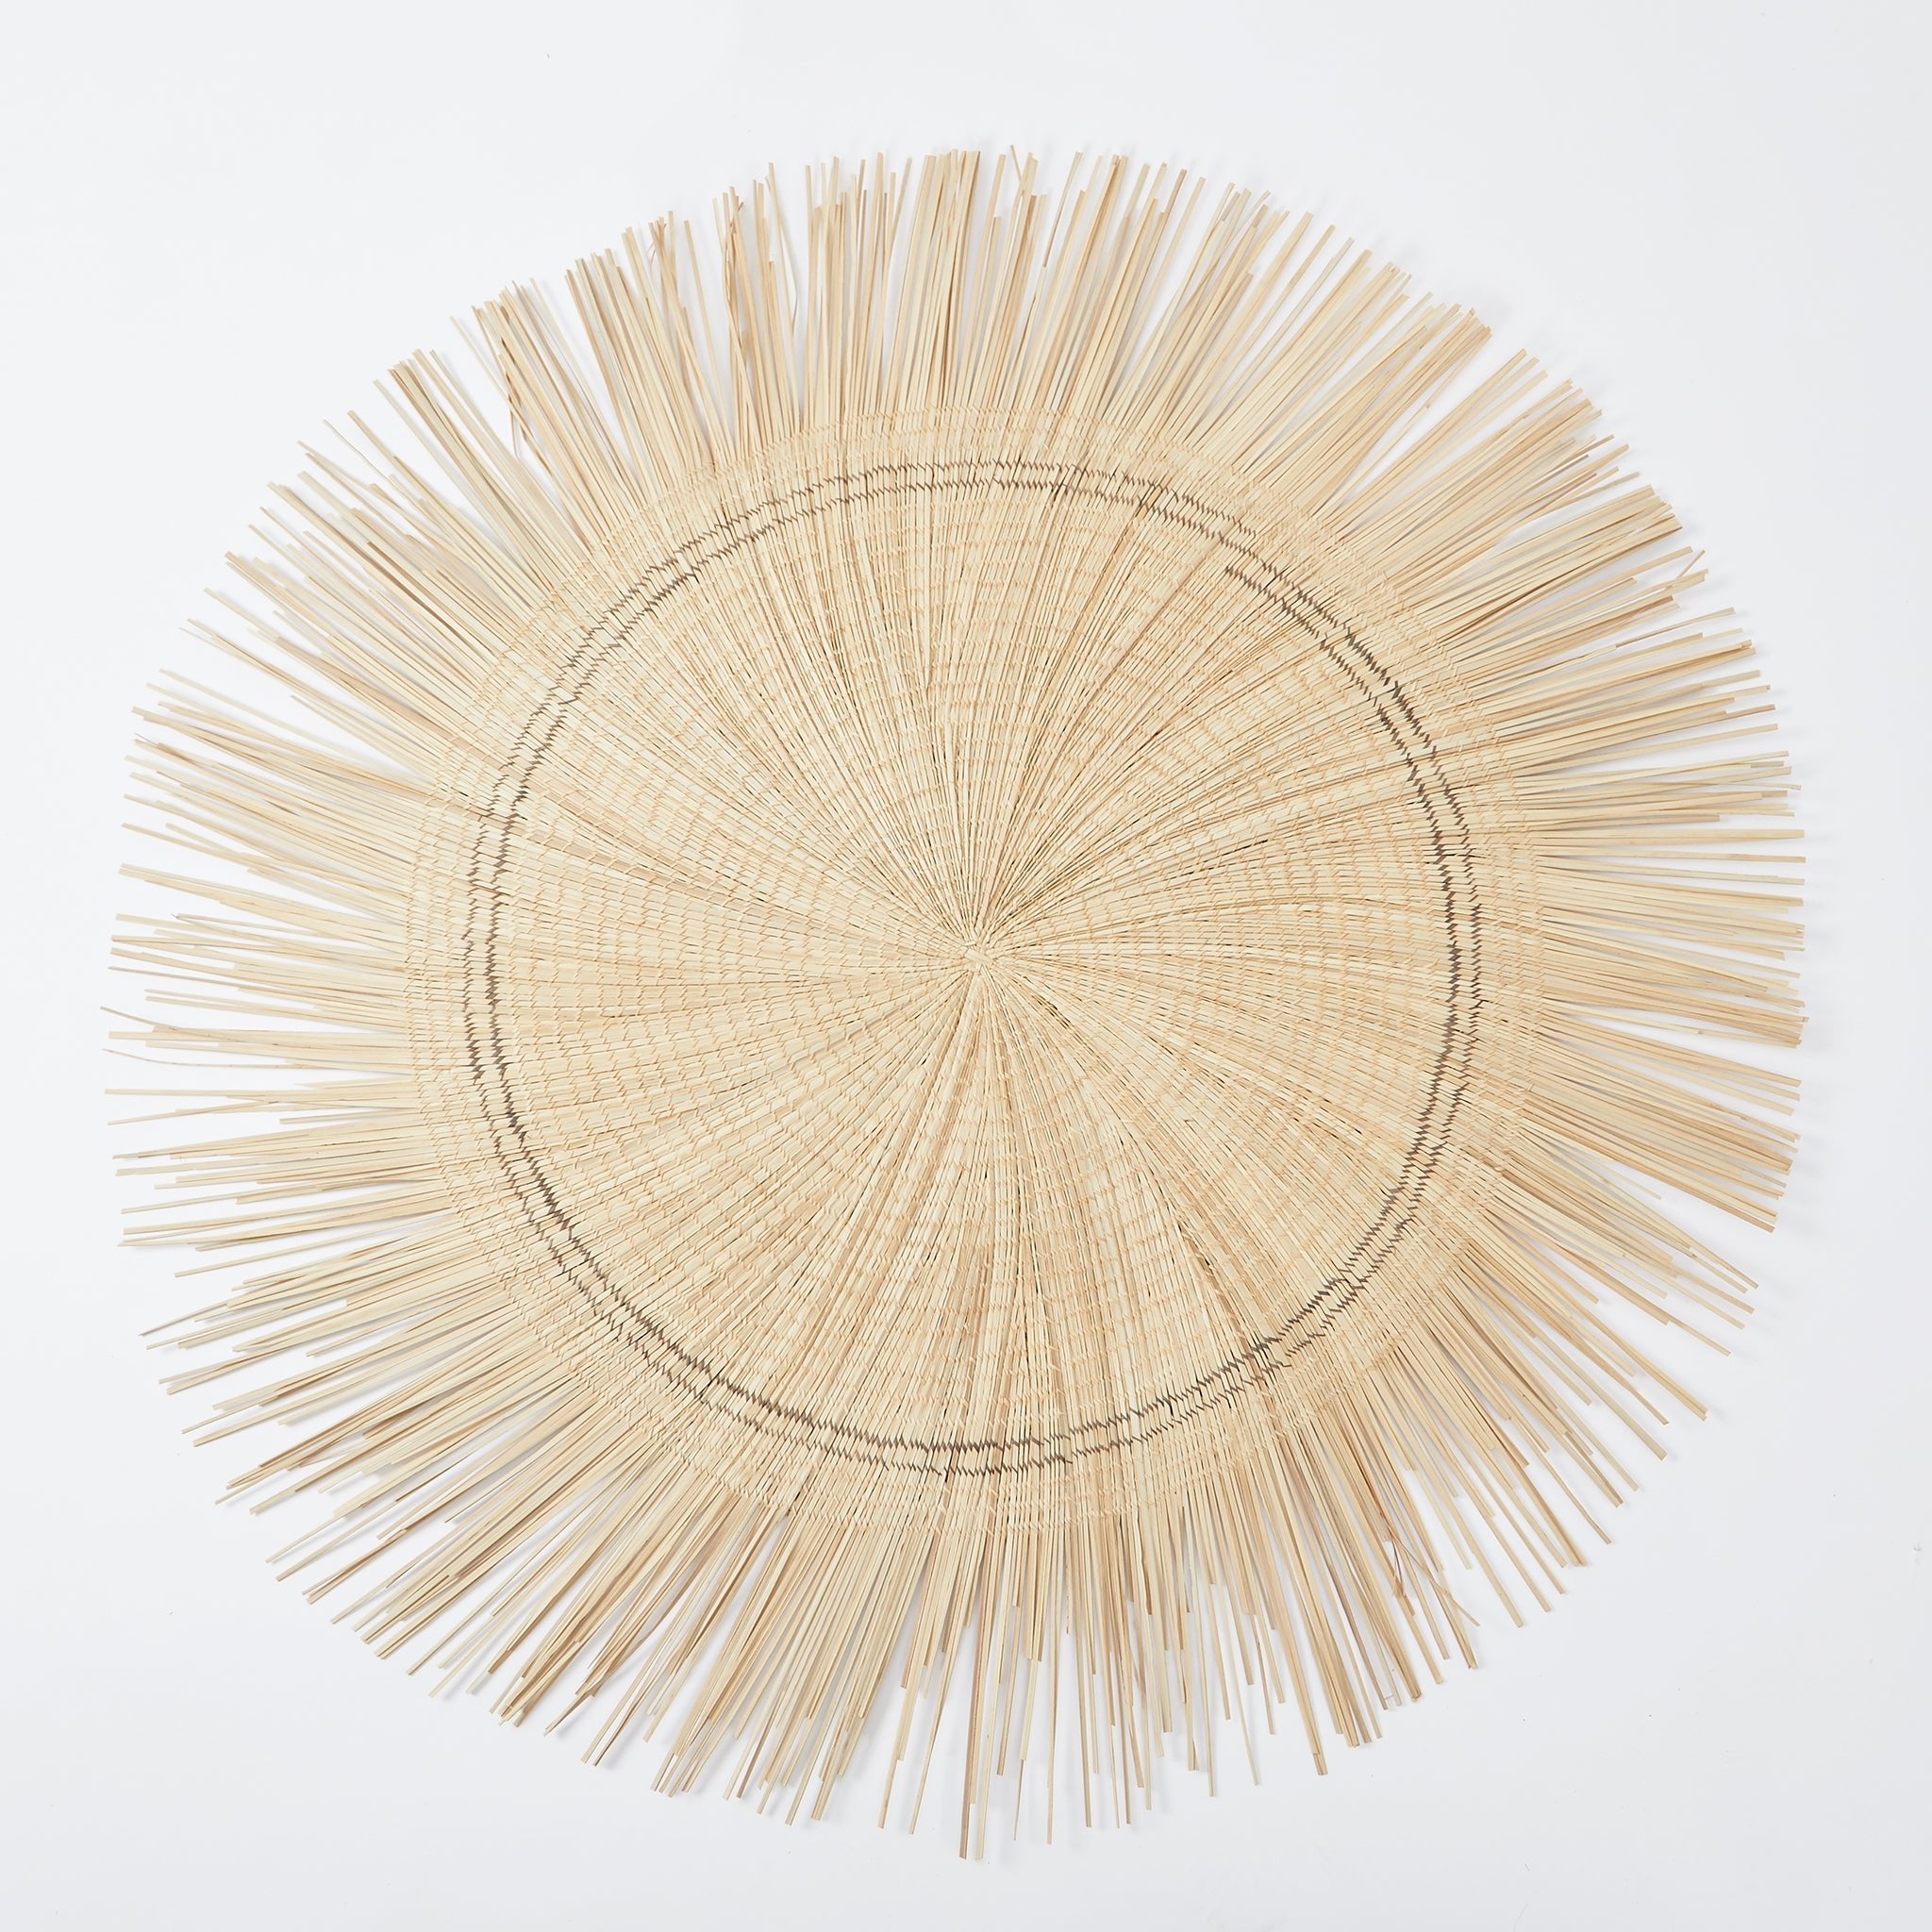 BY NATIVE Wall Decoration - Hand-woven "Sun Circle" 120 cm  